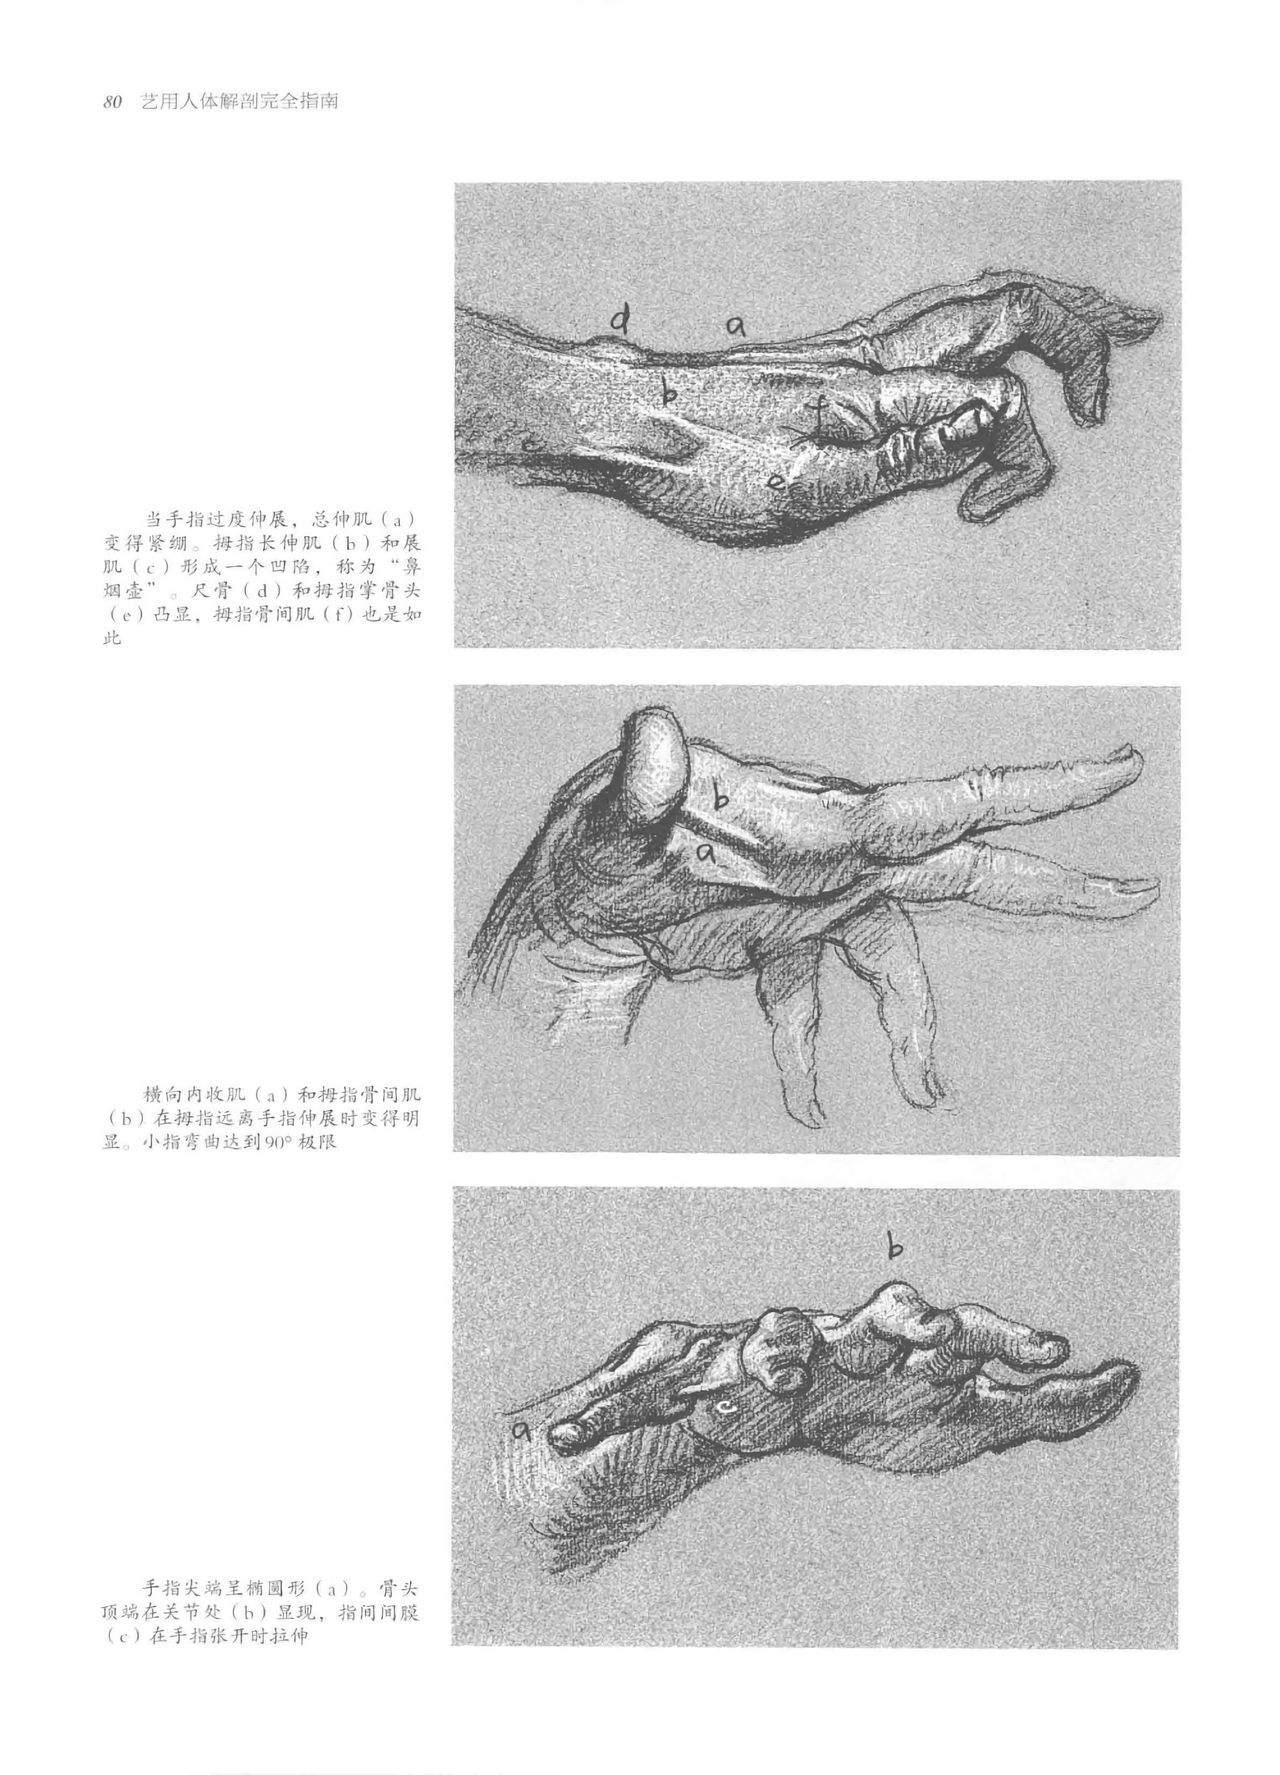 Anatomy-A Complete Guide for Artists - Joseph Sheppard [Chinese] 80